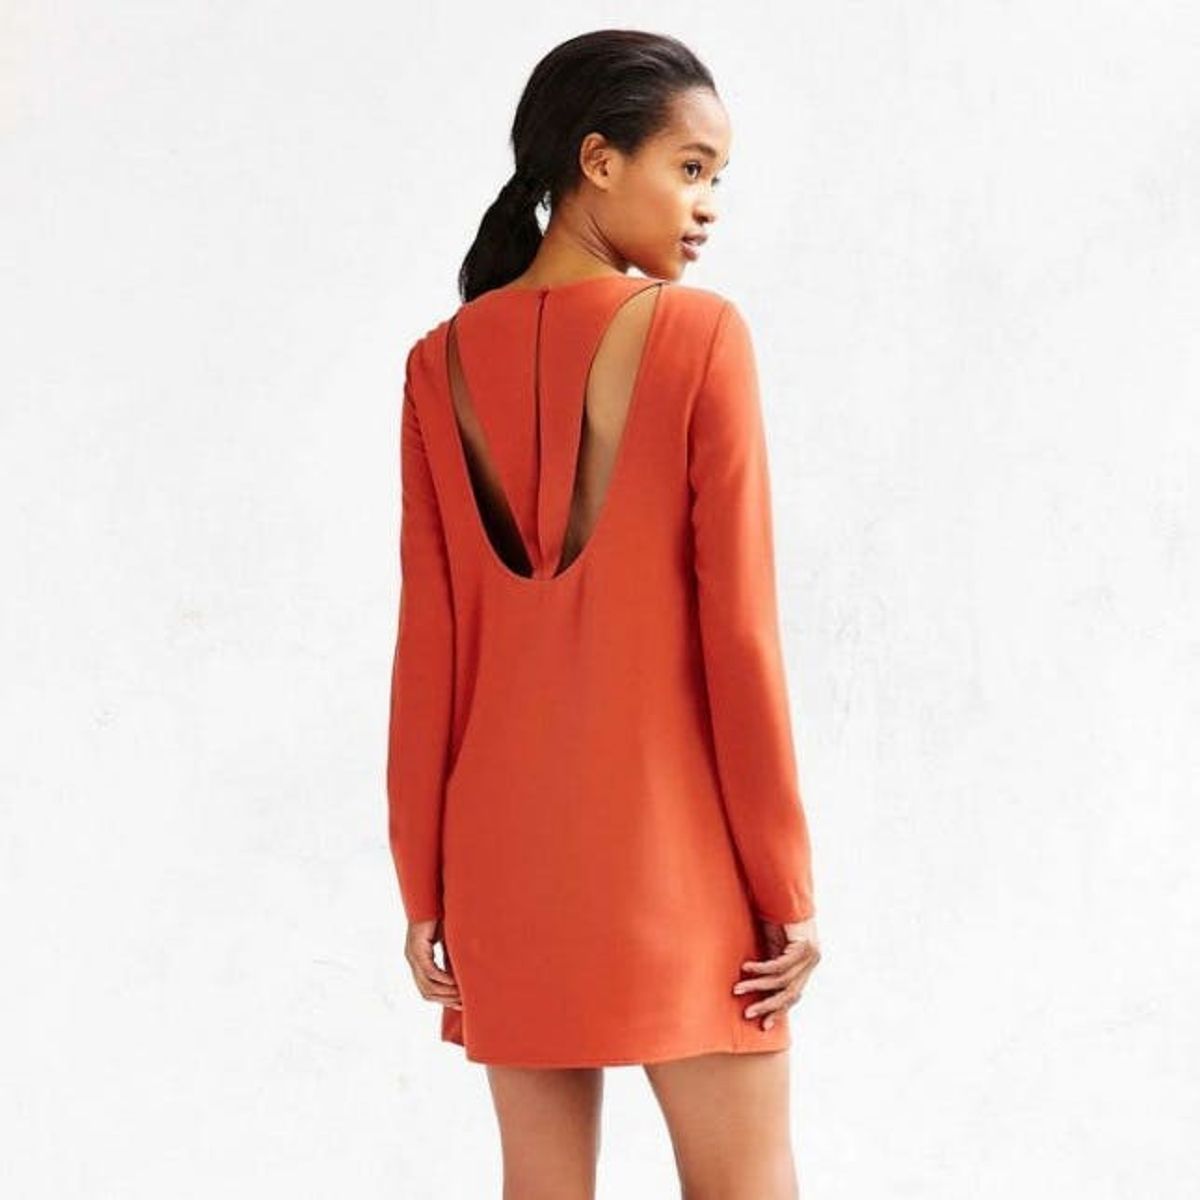 These 16 Dresses Are All About the Party in the Back - Brit + Co